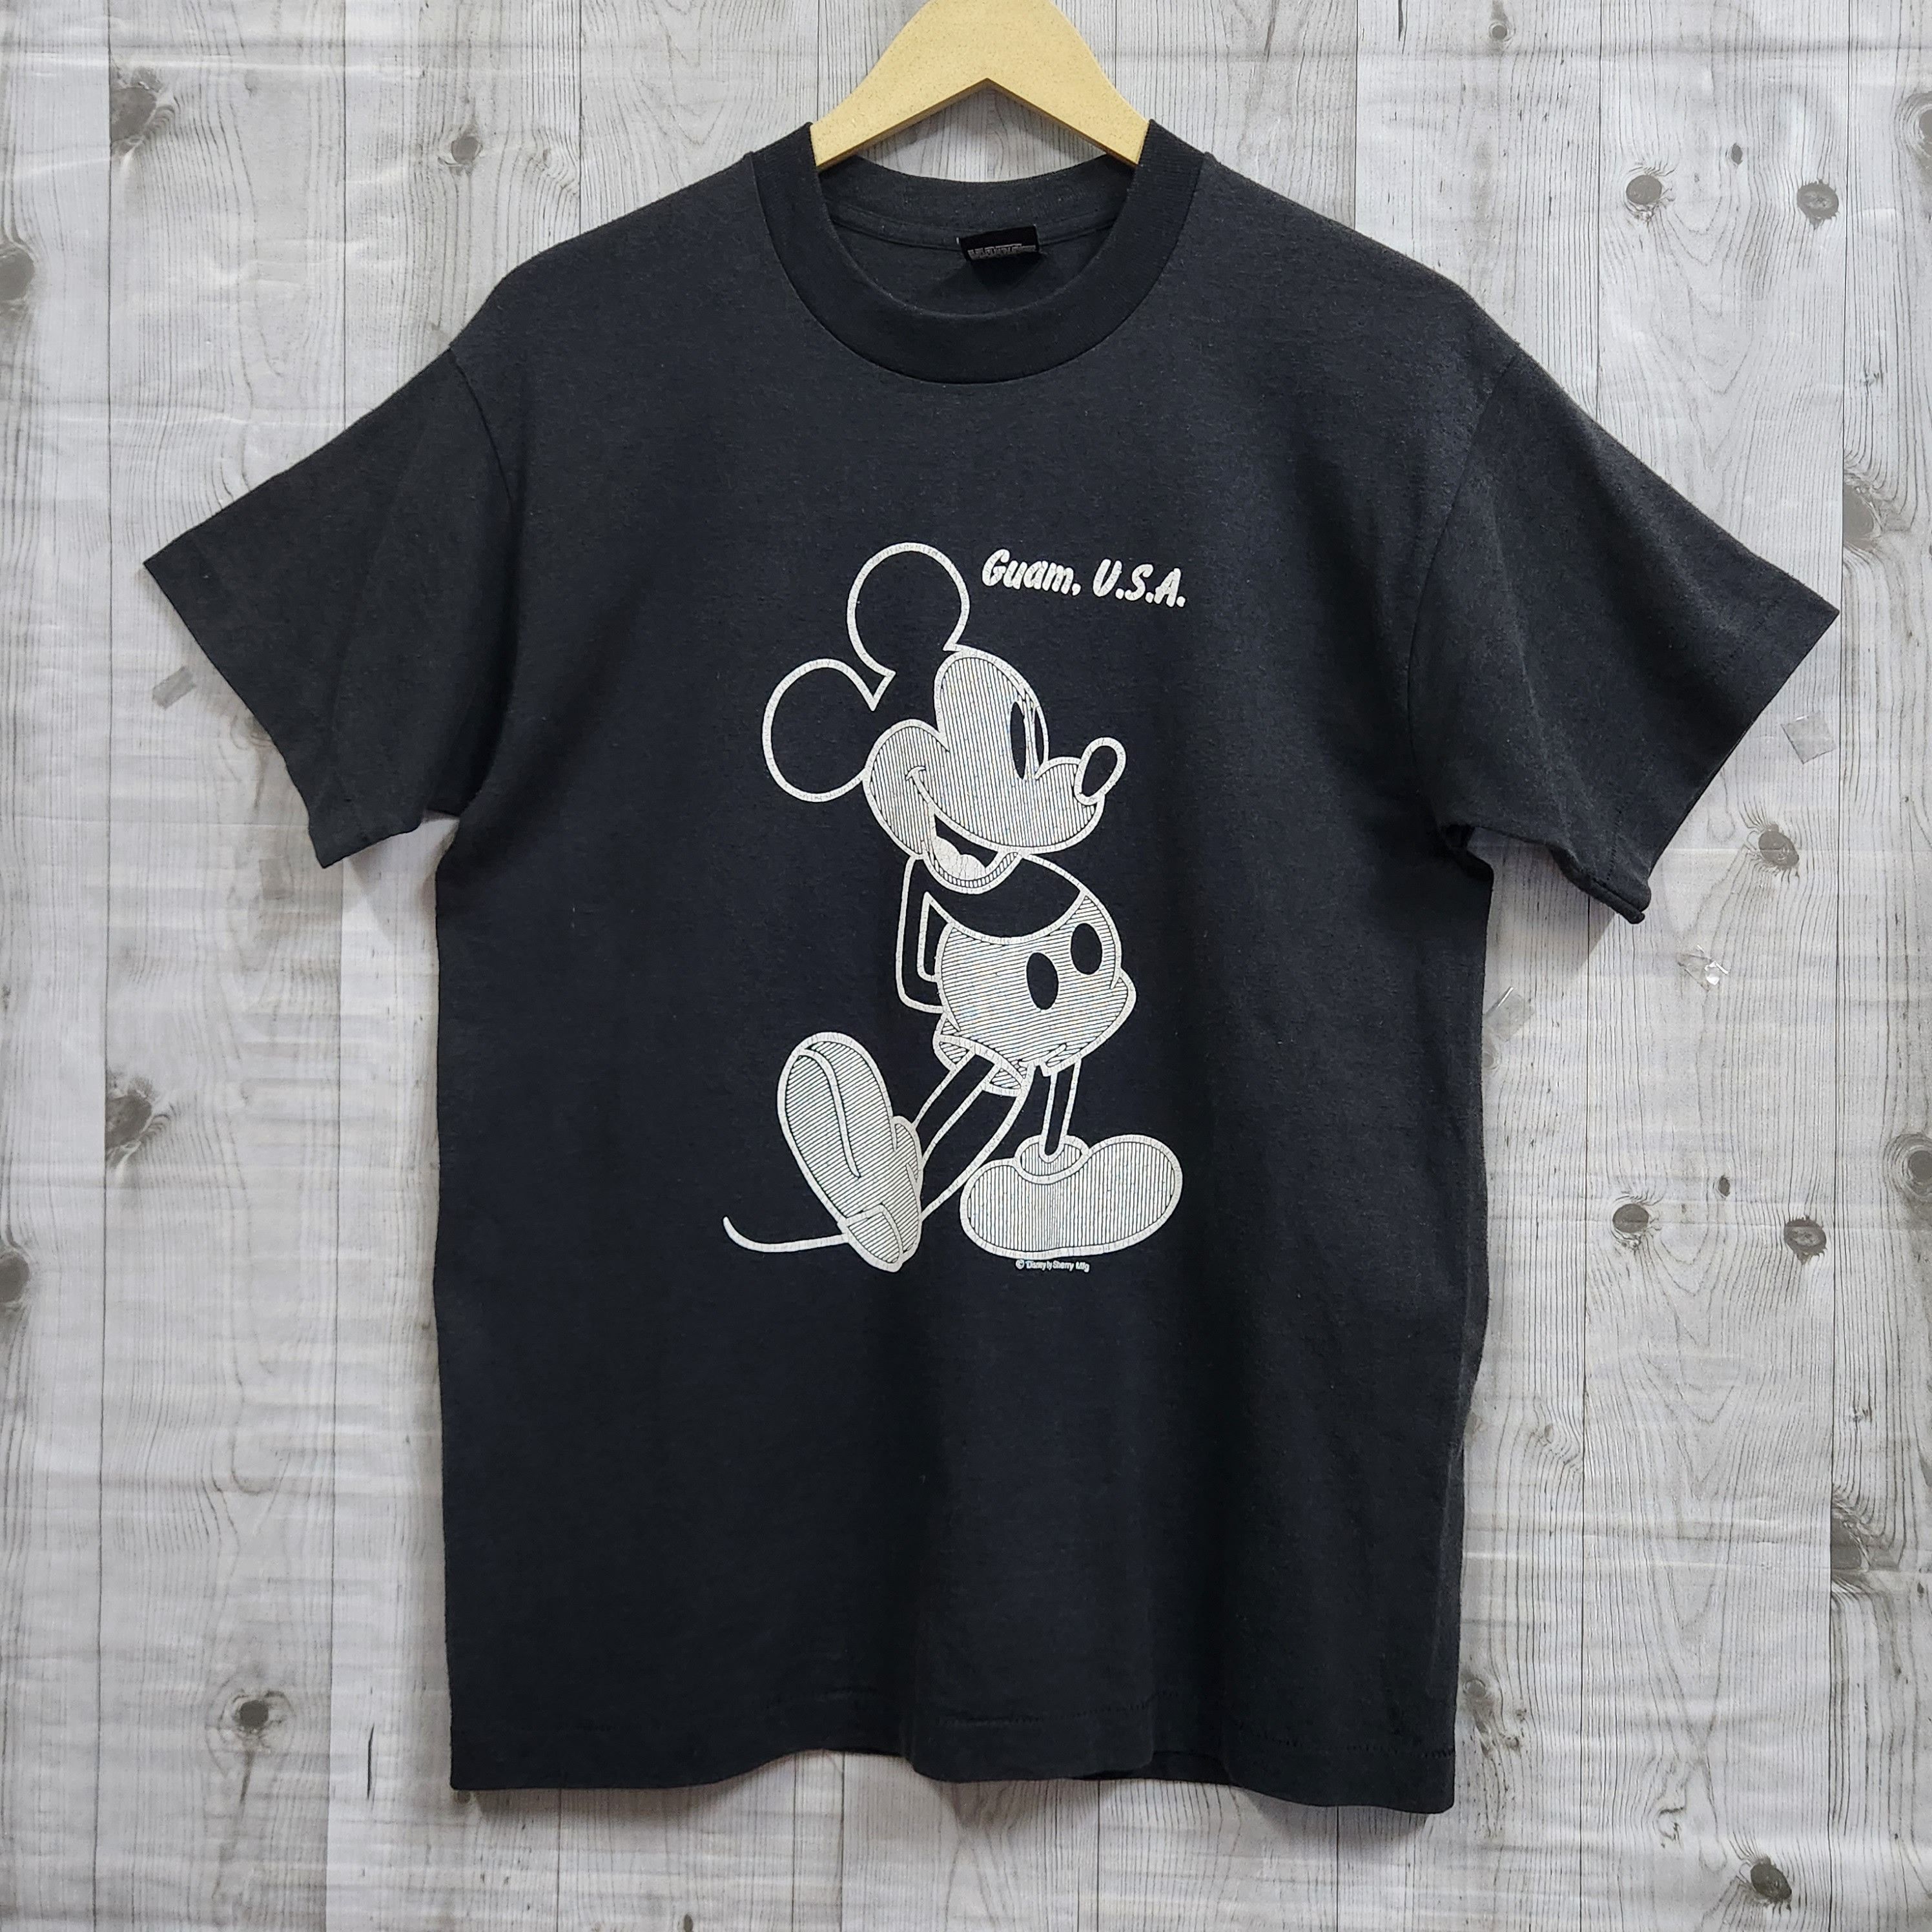 Vintage 1980s Mickey Mouse Guam Single Stitches - 1